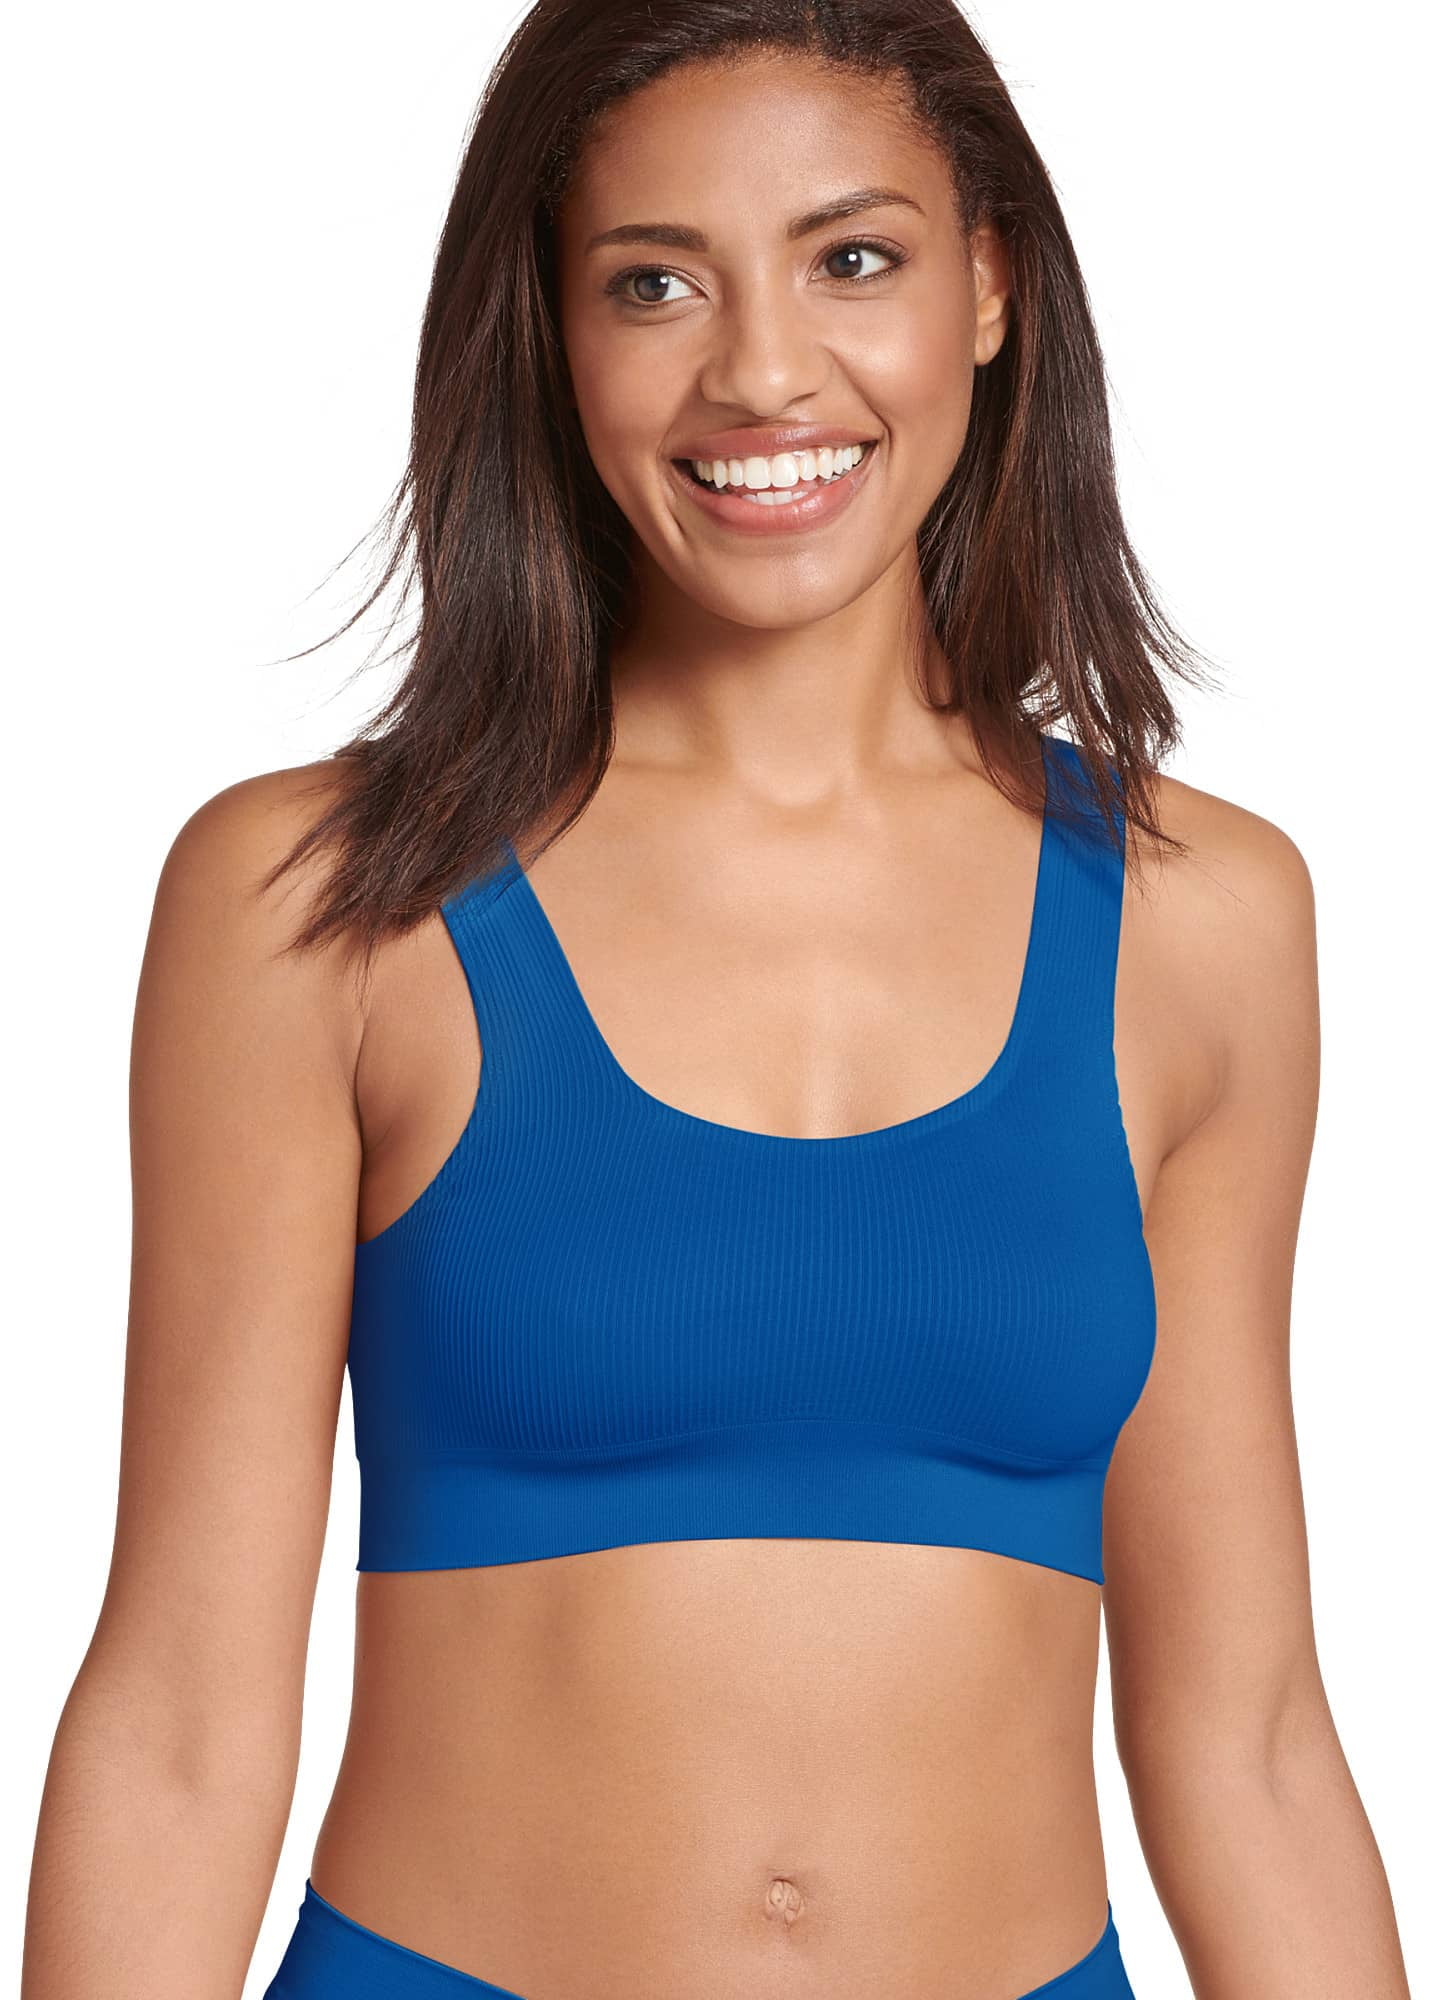 Kindly Yours Women's Sustainable Cotton Adjustable Scoop Bralette